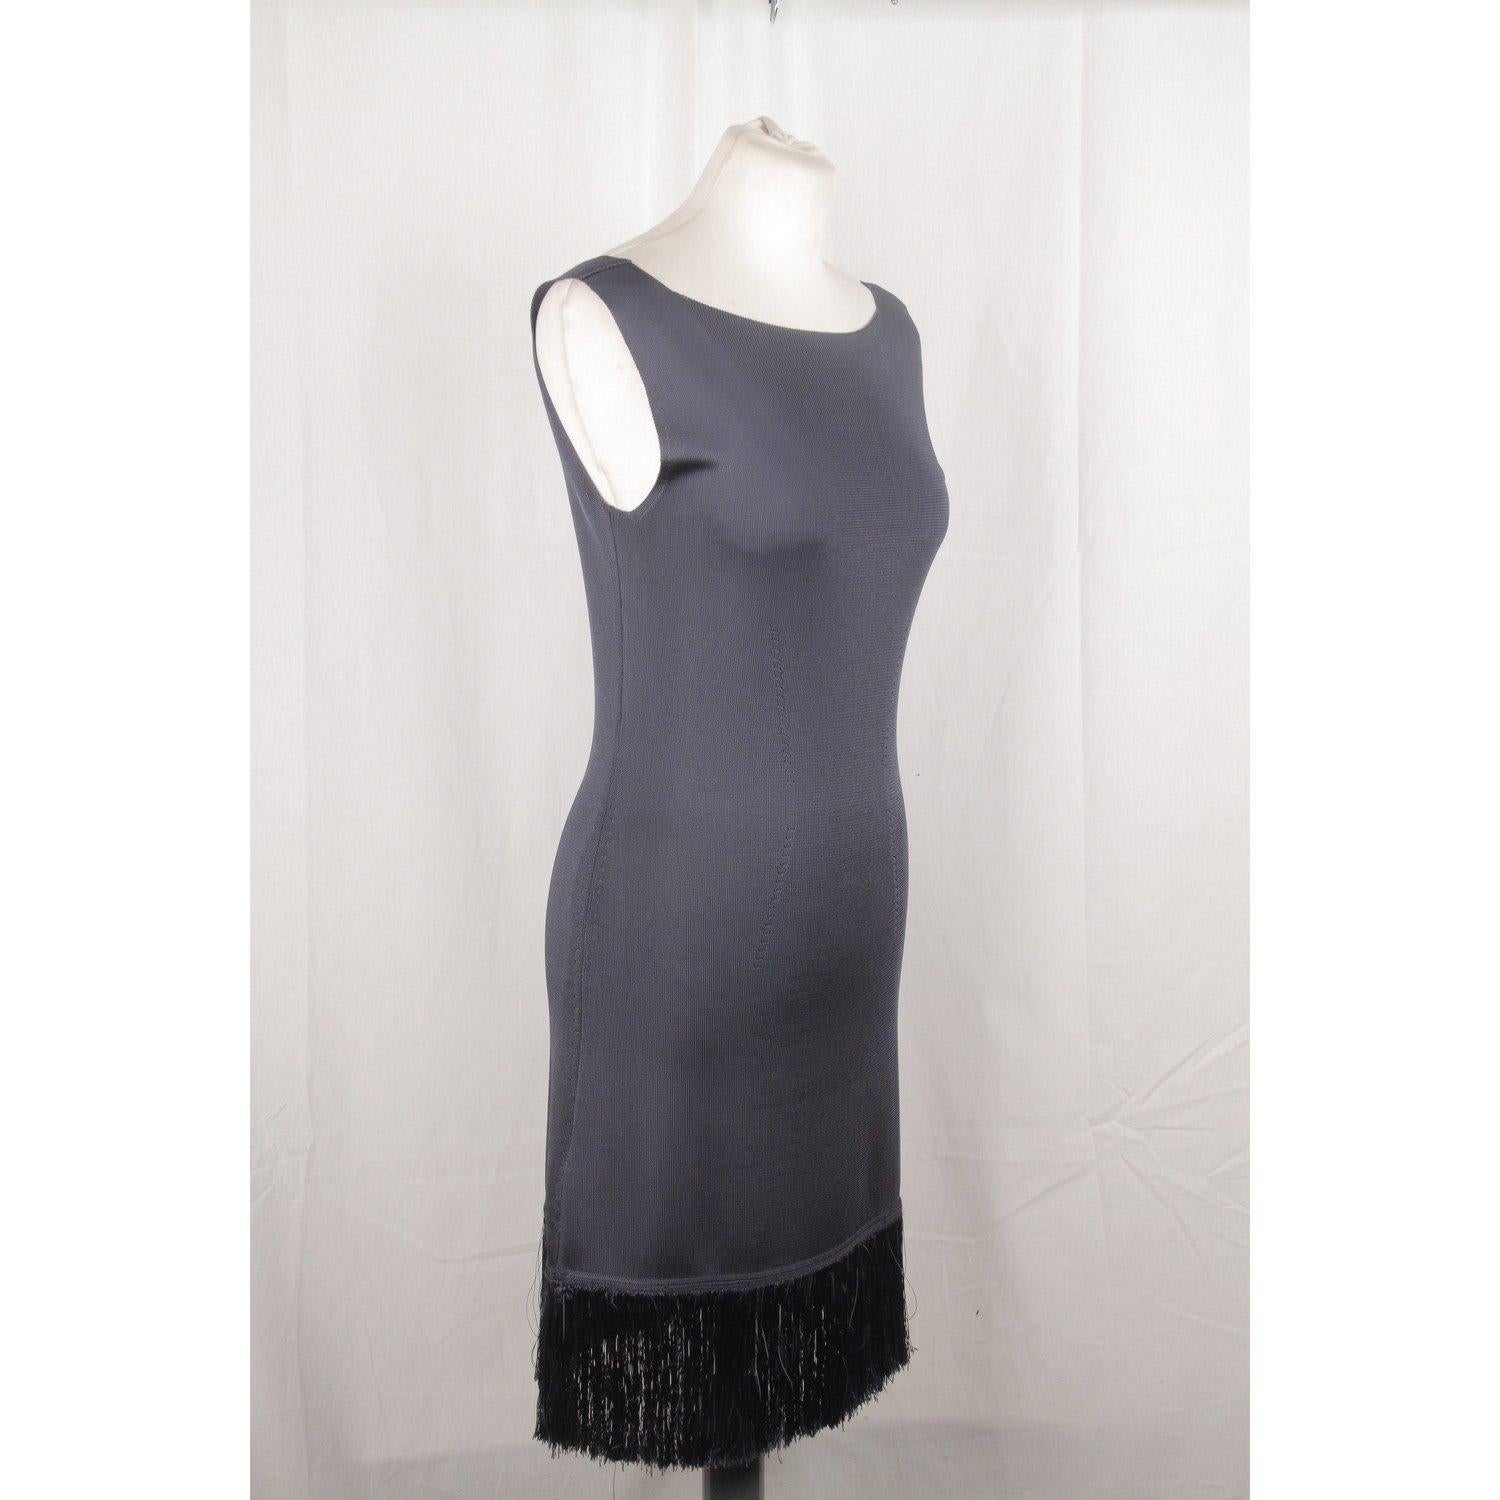 MATERIAL: Rayon COLOR: Blue MODEL: Sleeveless Dress GENDER: Women SIZE: Small CONDITION RATING: A :EXCELLENT CONDITION - Used once or twice. Looks mint. Imperceptible signs of wear CONDITION DETAILS: gently used MEASUREMENTS: SHOULDER TO SHOULDER: